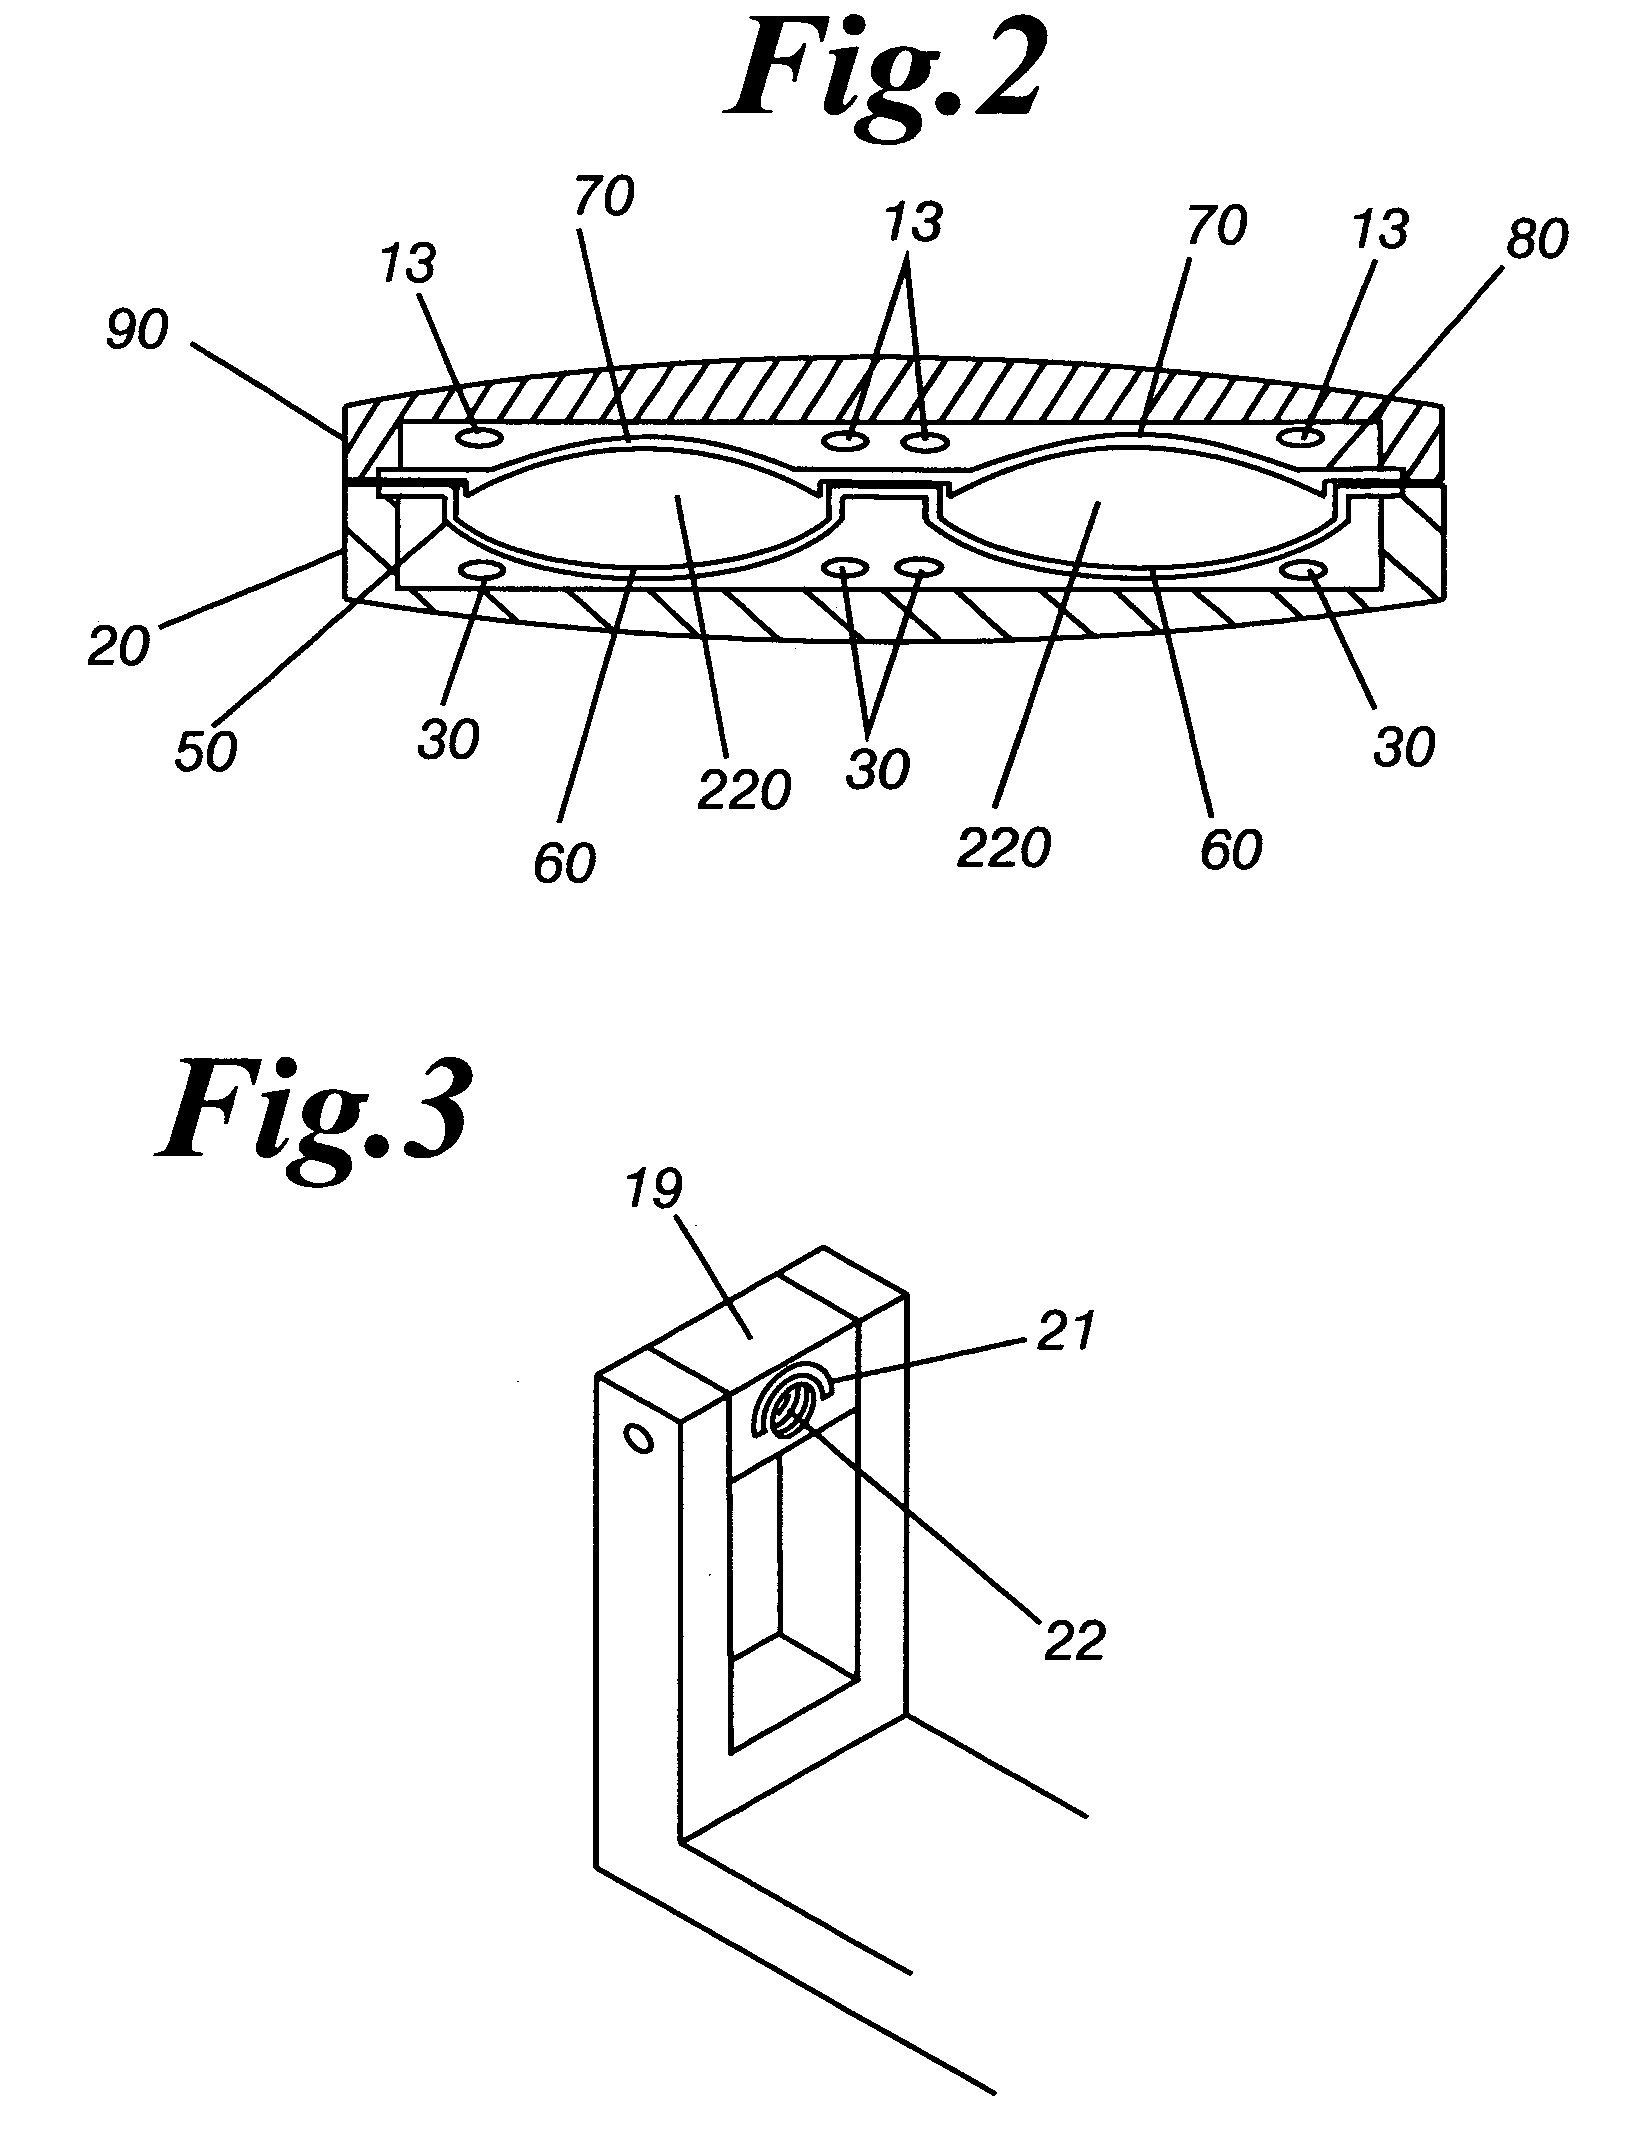 Method and apparatus to cook and form an omelet in one step